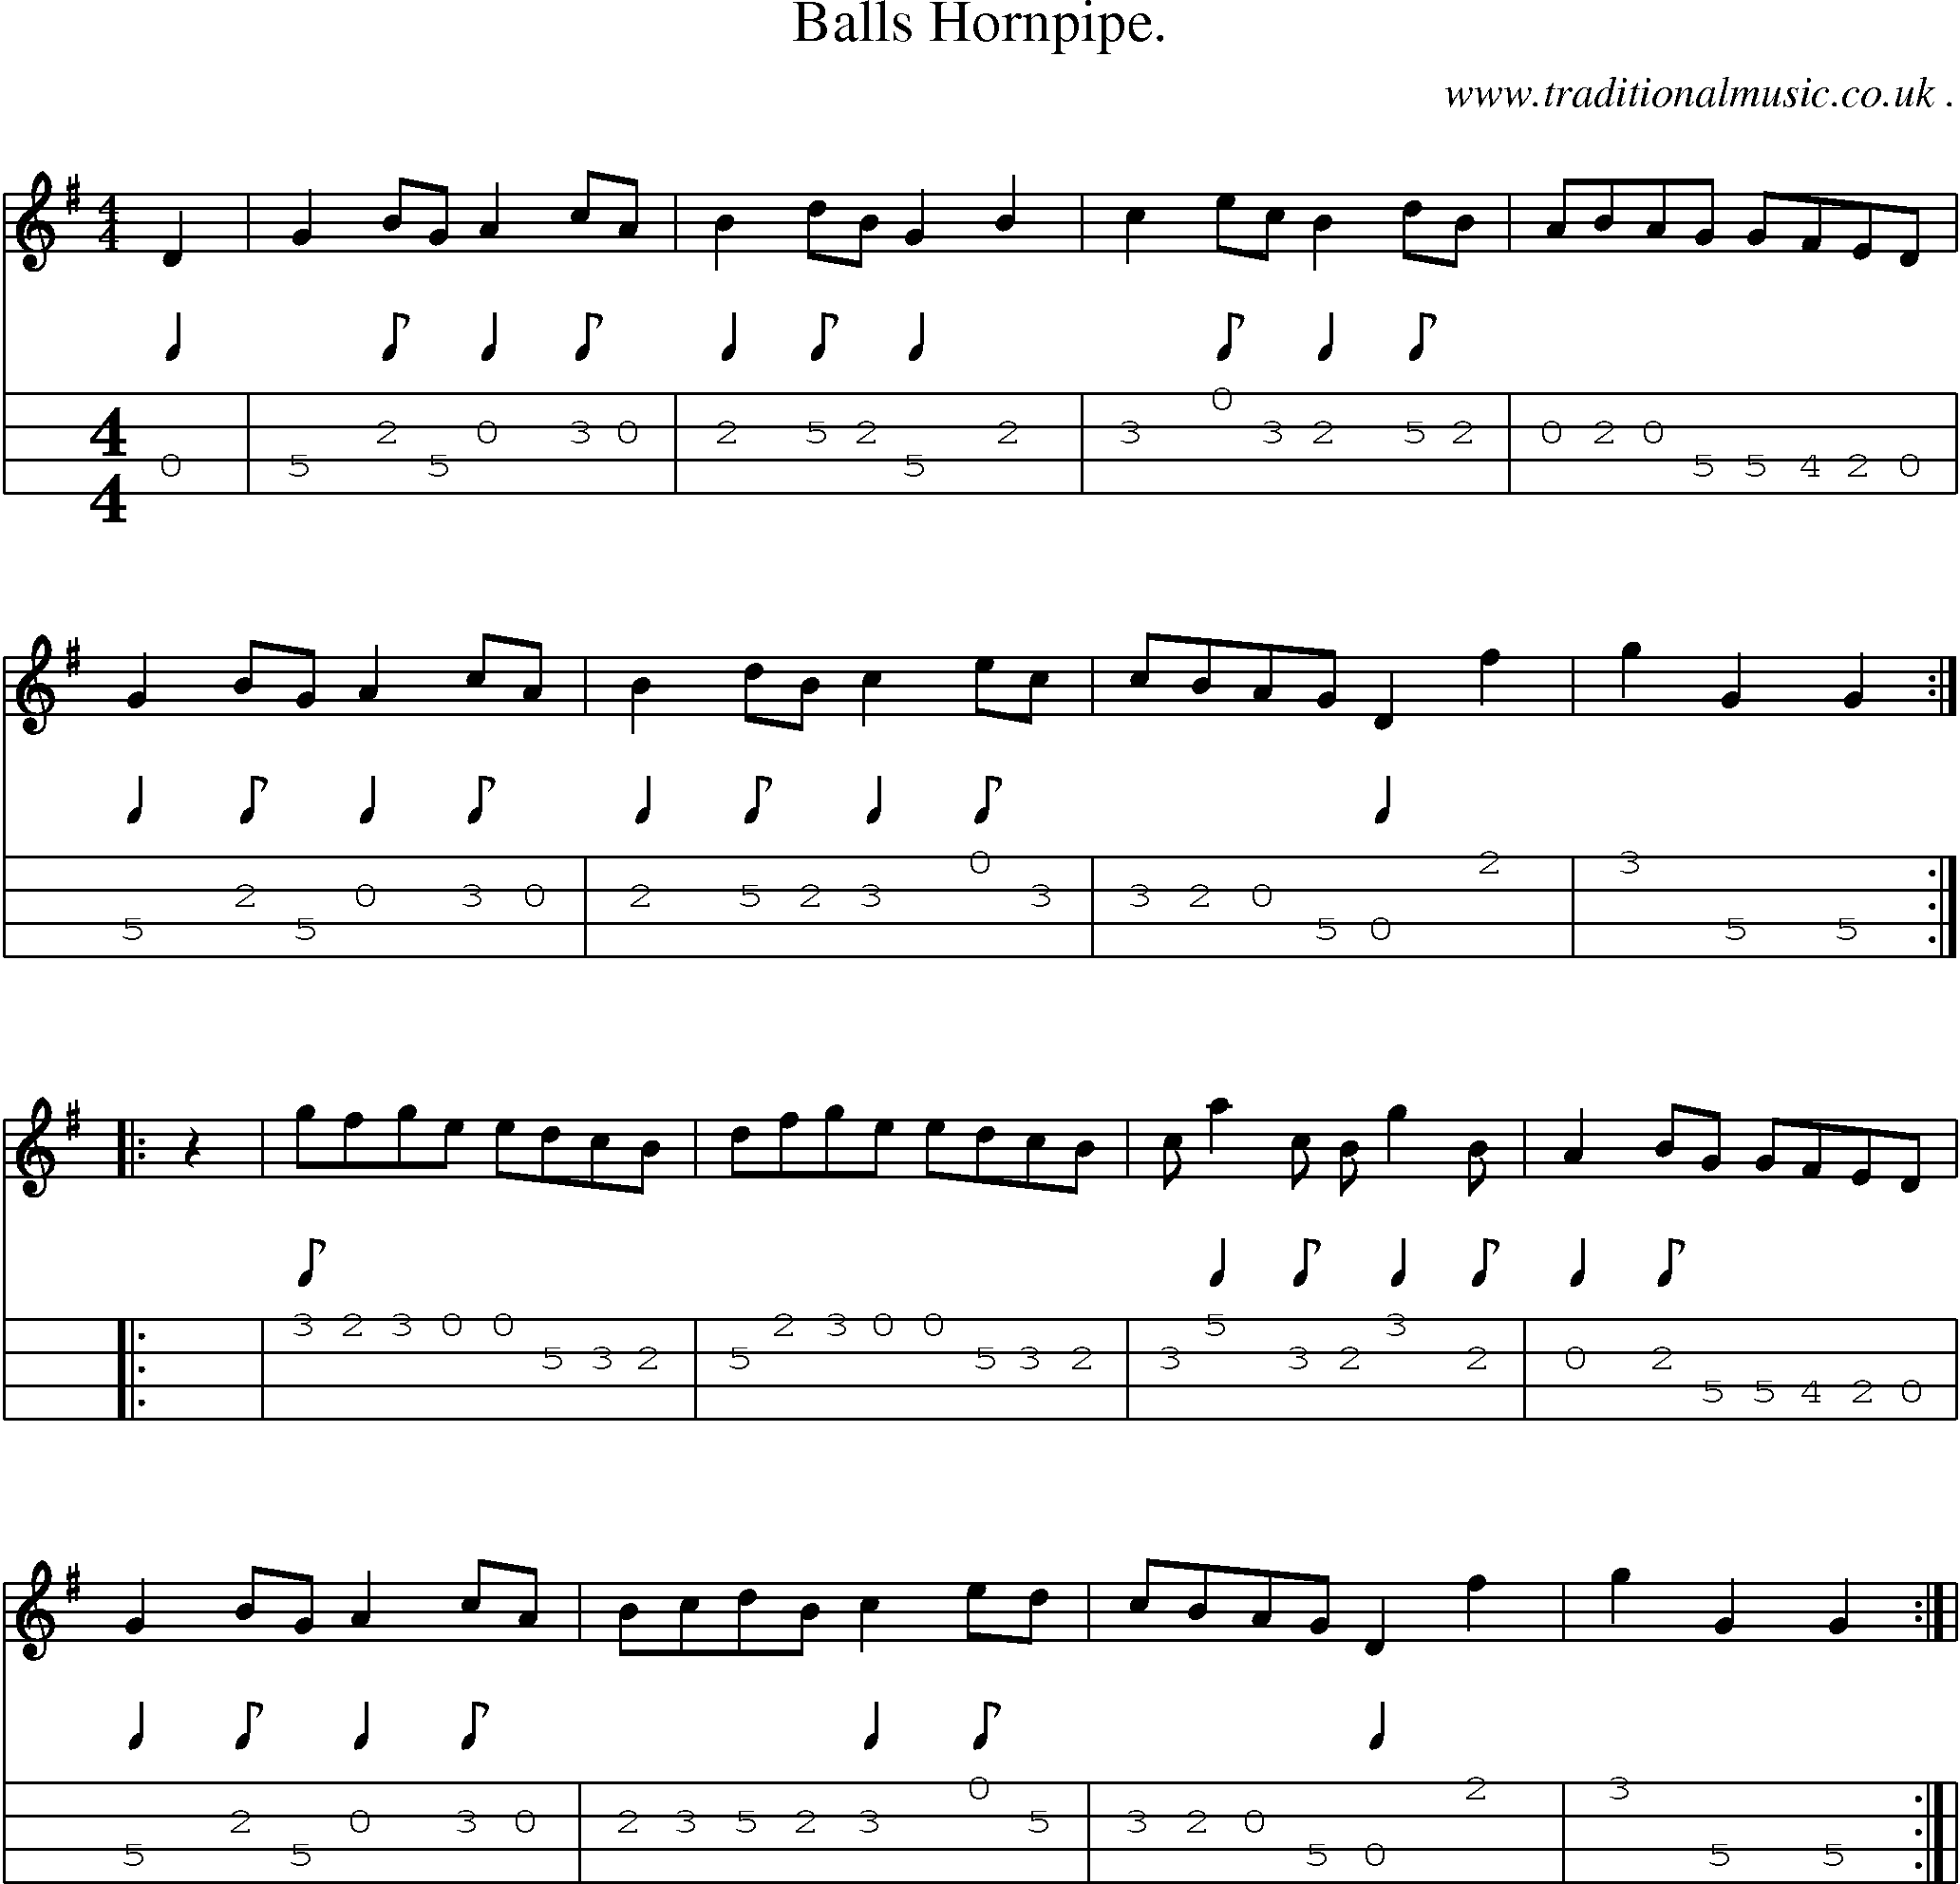 Sheet-Music and Mandolin Tabs for Balls Hornpipe